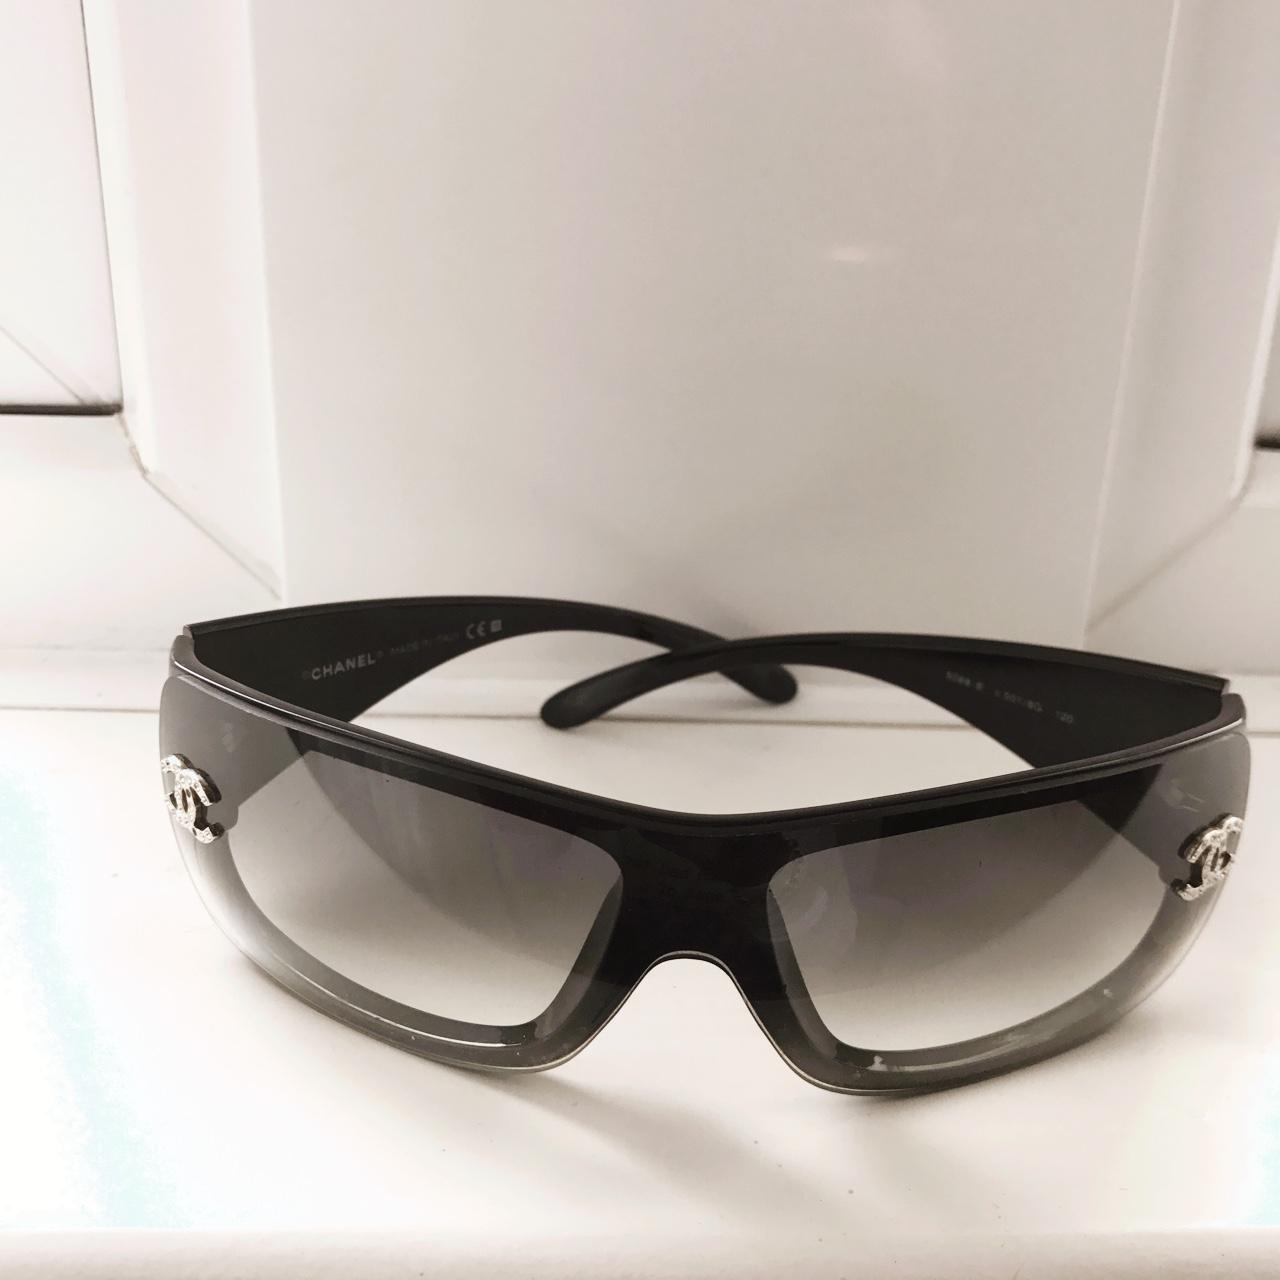 Vintage Chanel sunglasses in classic black with side